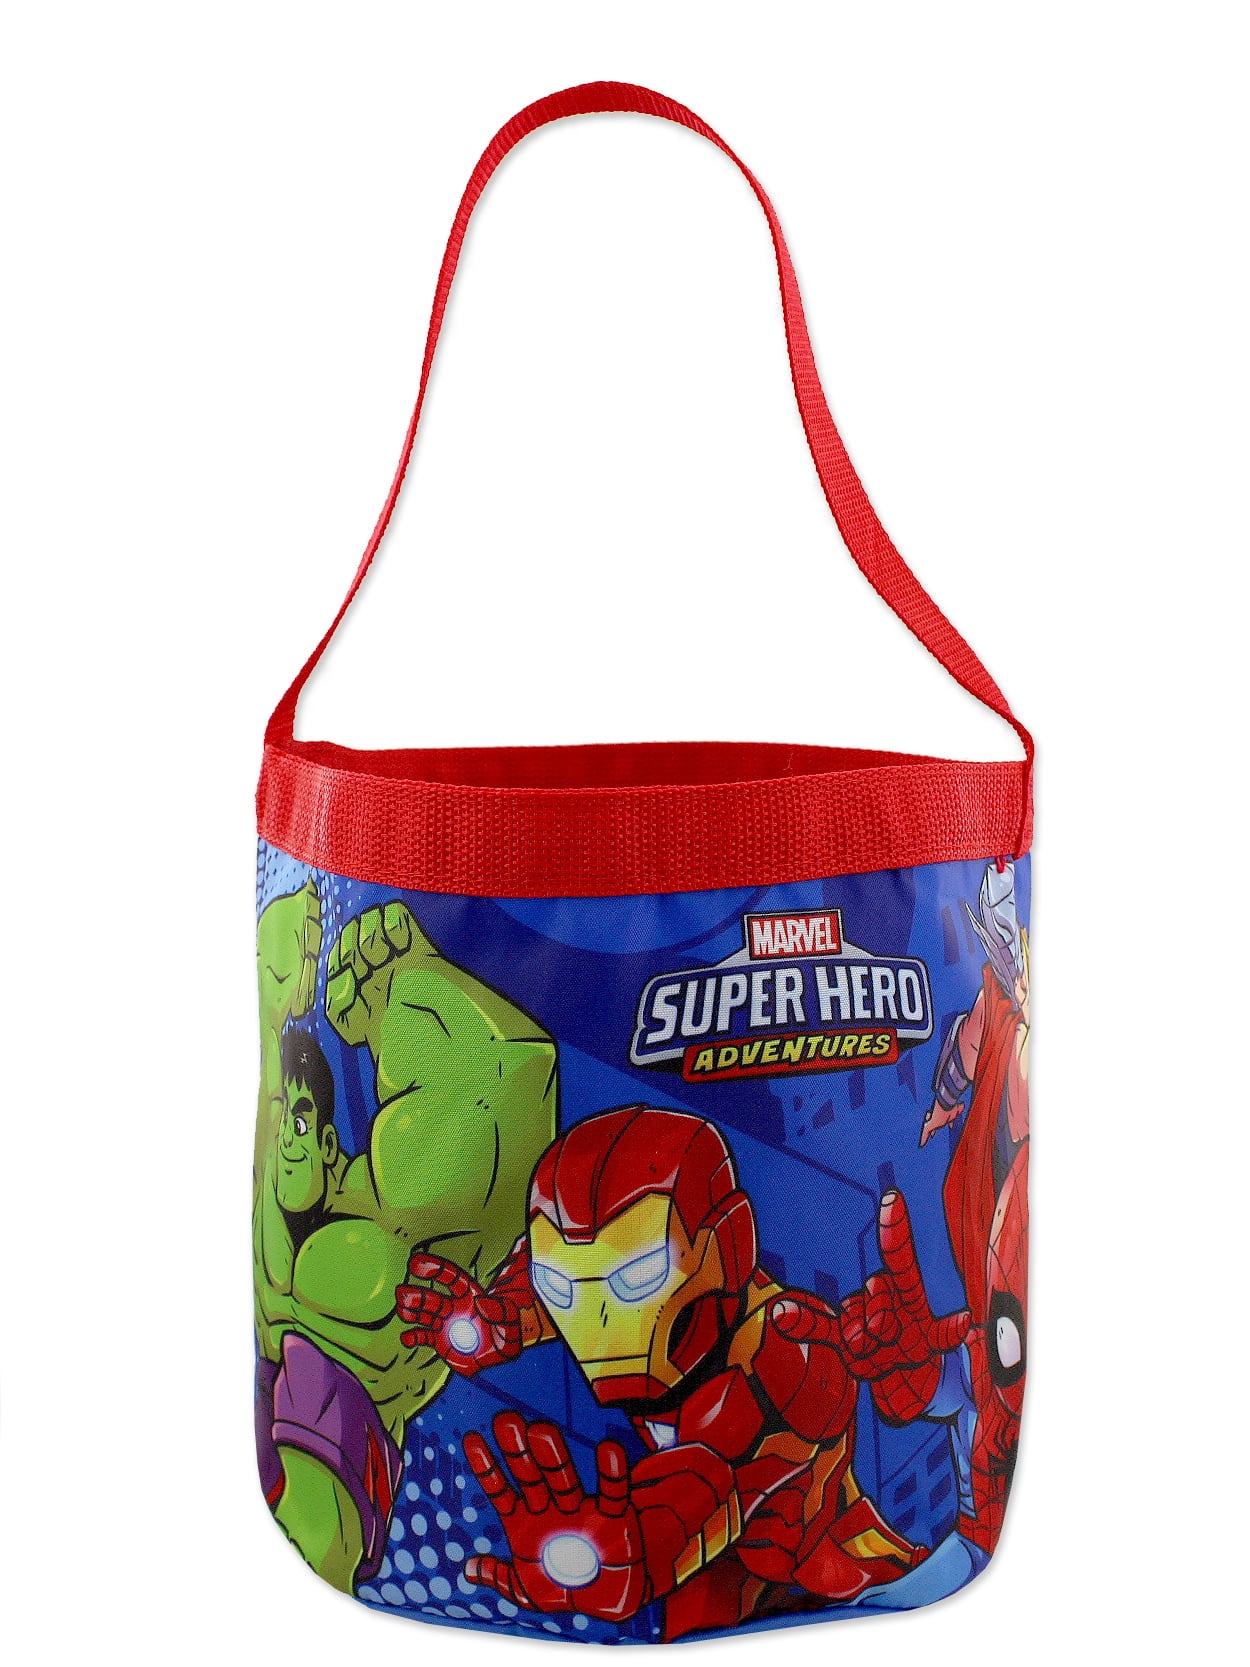 6 AVENGERS SUPER HERO PERSONALISED FOLD OVER CARD & BAG BIRTHDAY PARTY FAVOURS